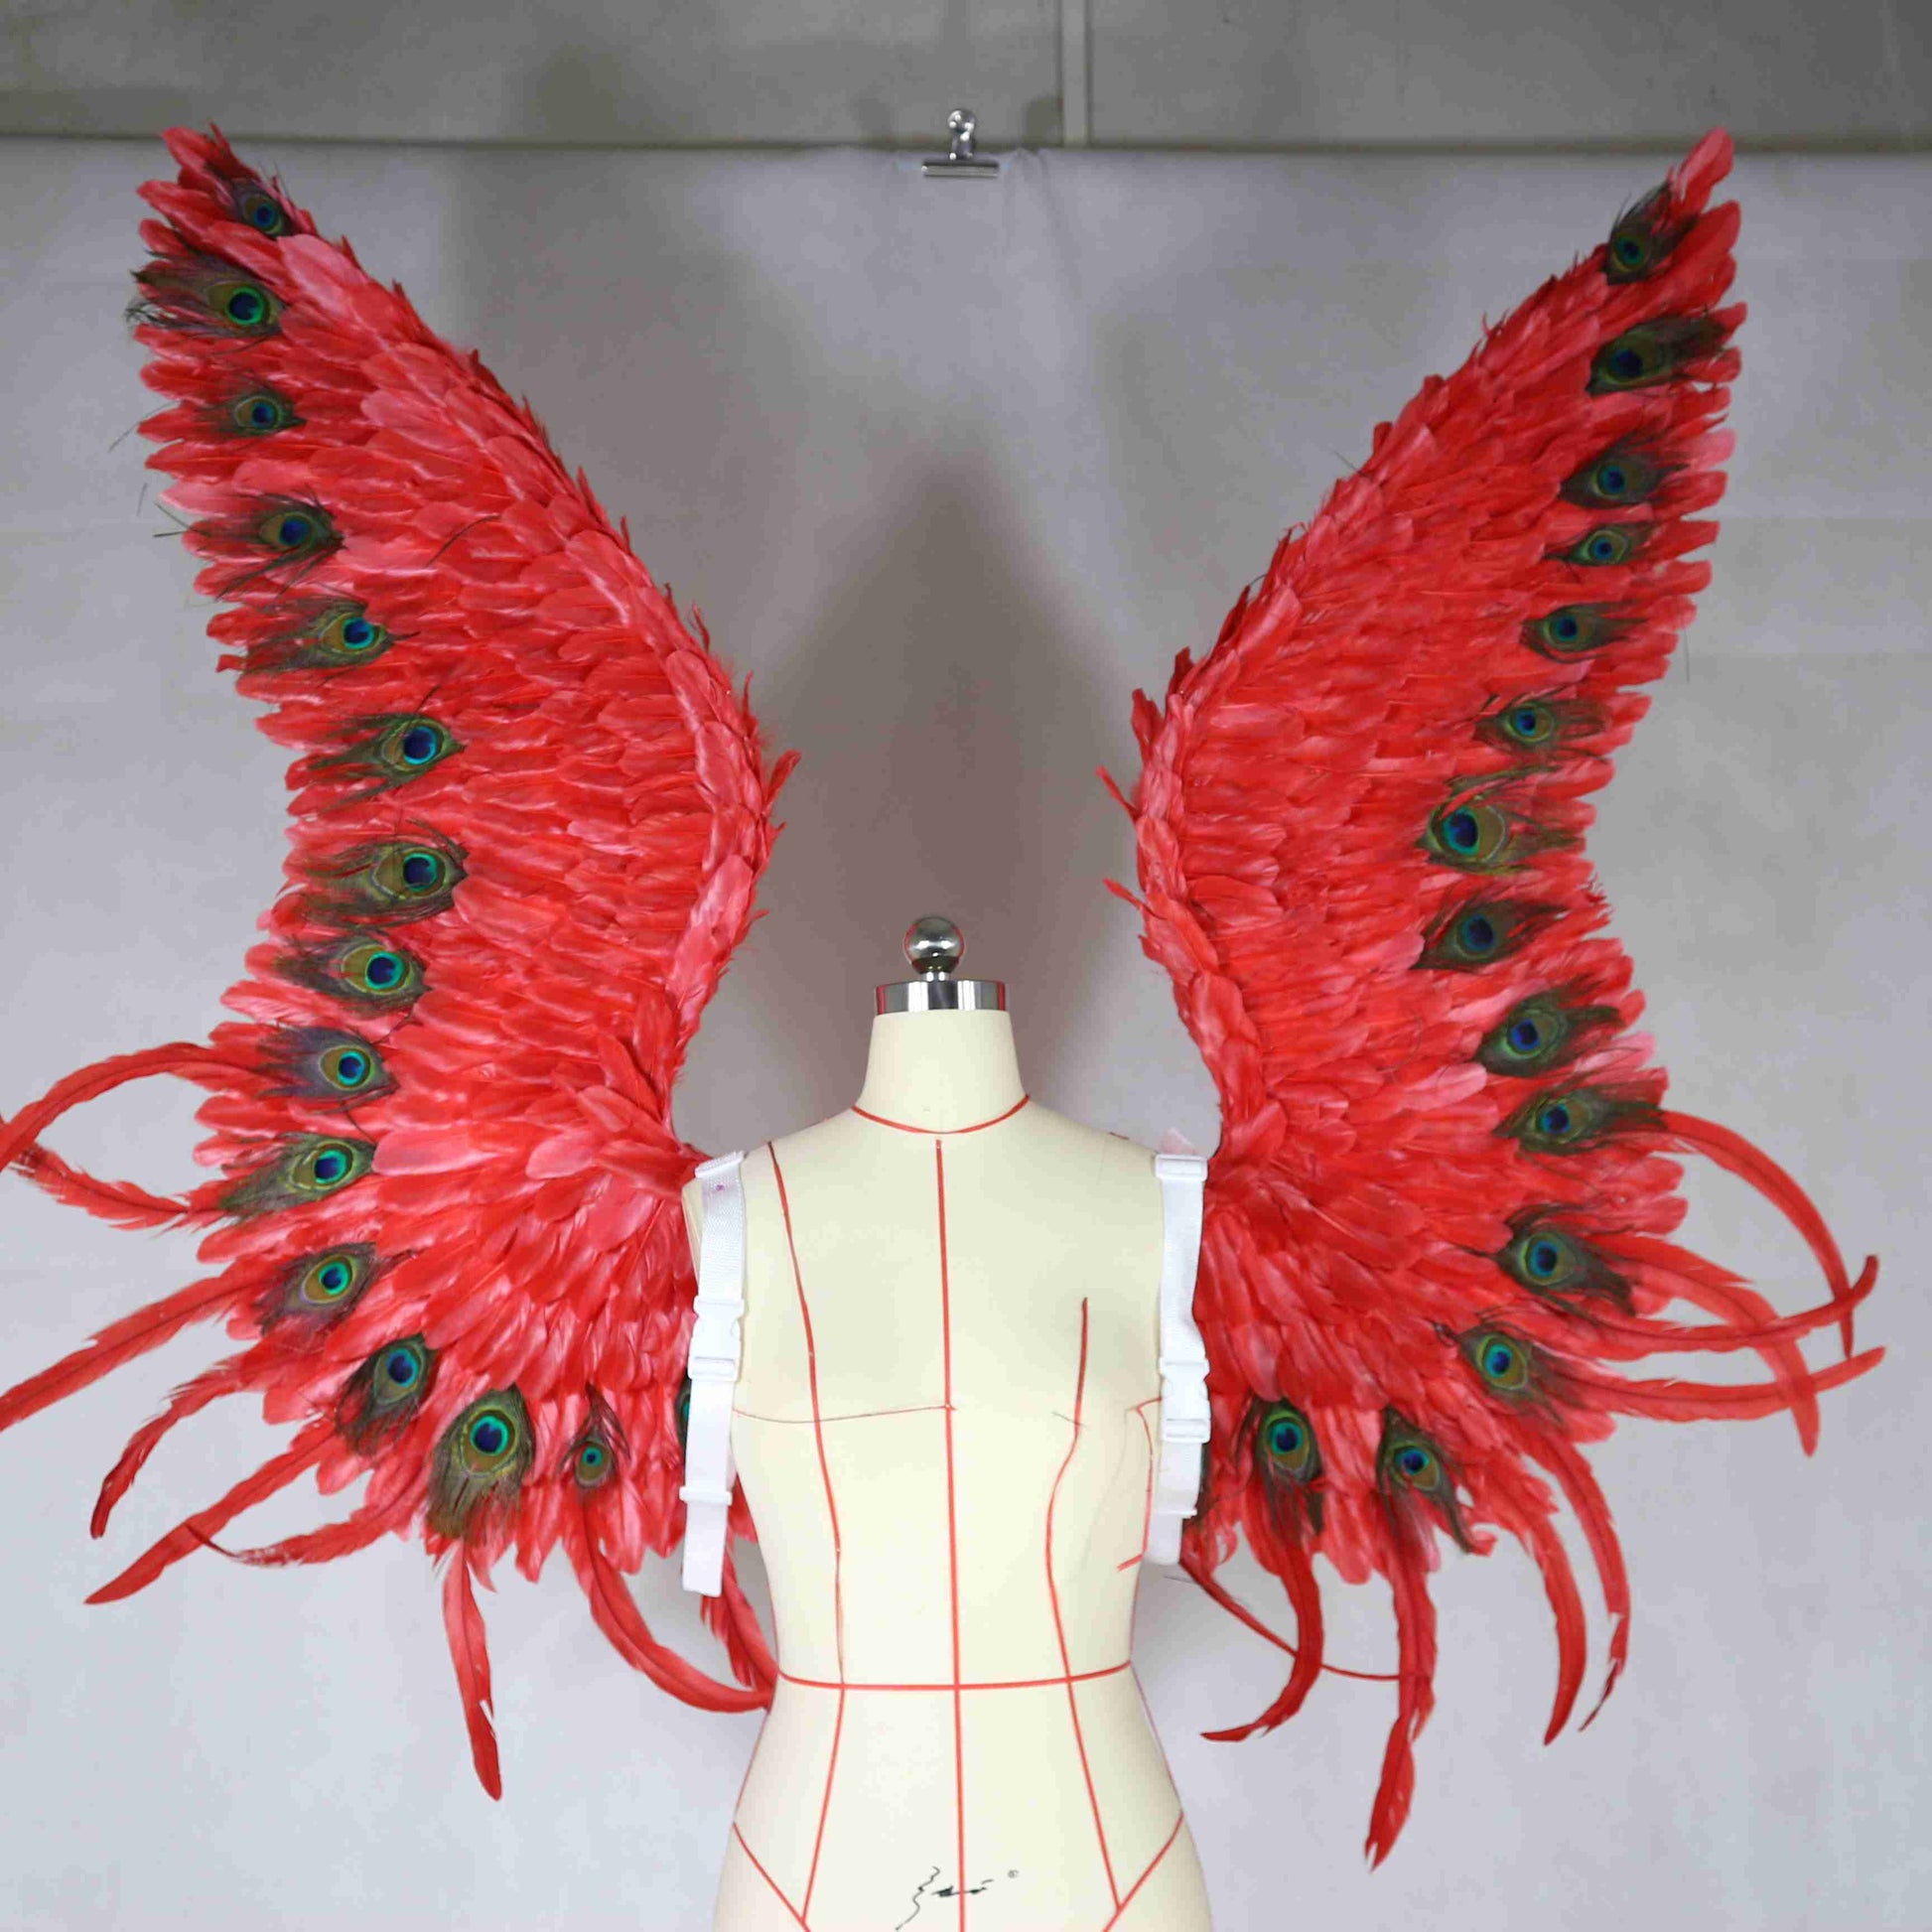 Our red peacock angel wings from the front. Made from goose feathers and peacock feathers. Wings for angel wings costume. Suitable for photoshoots.